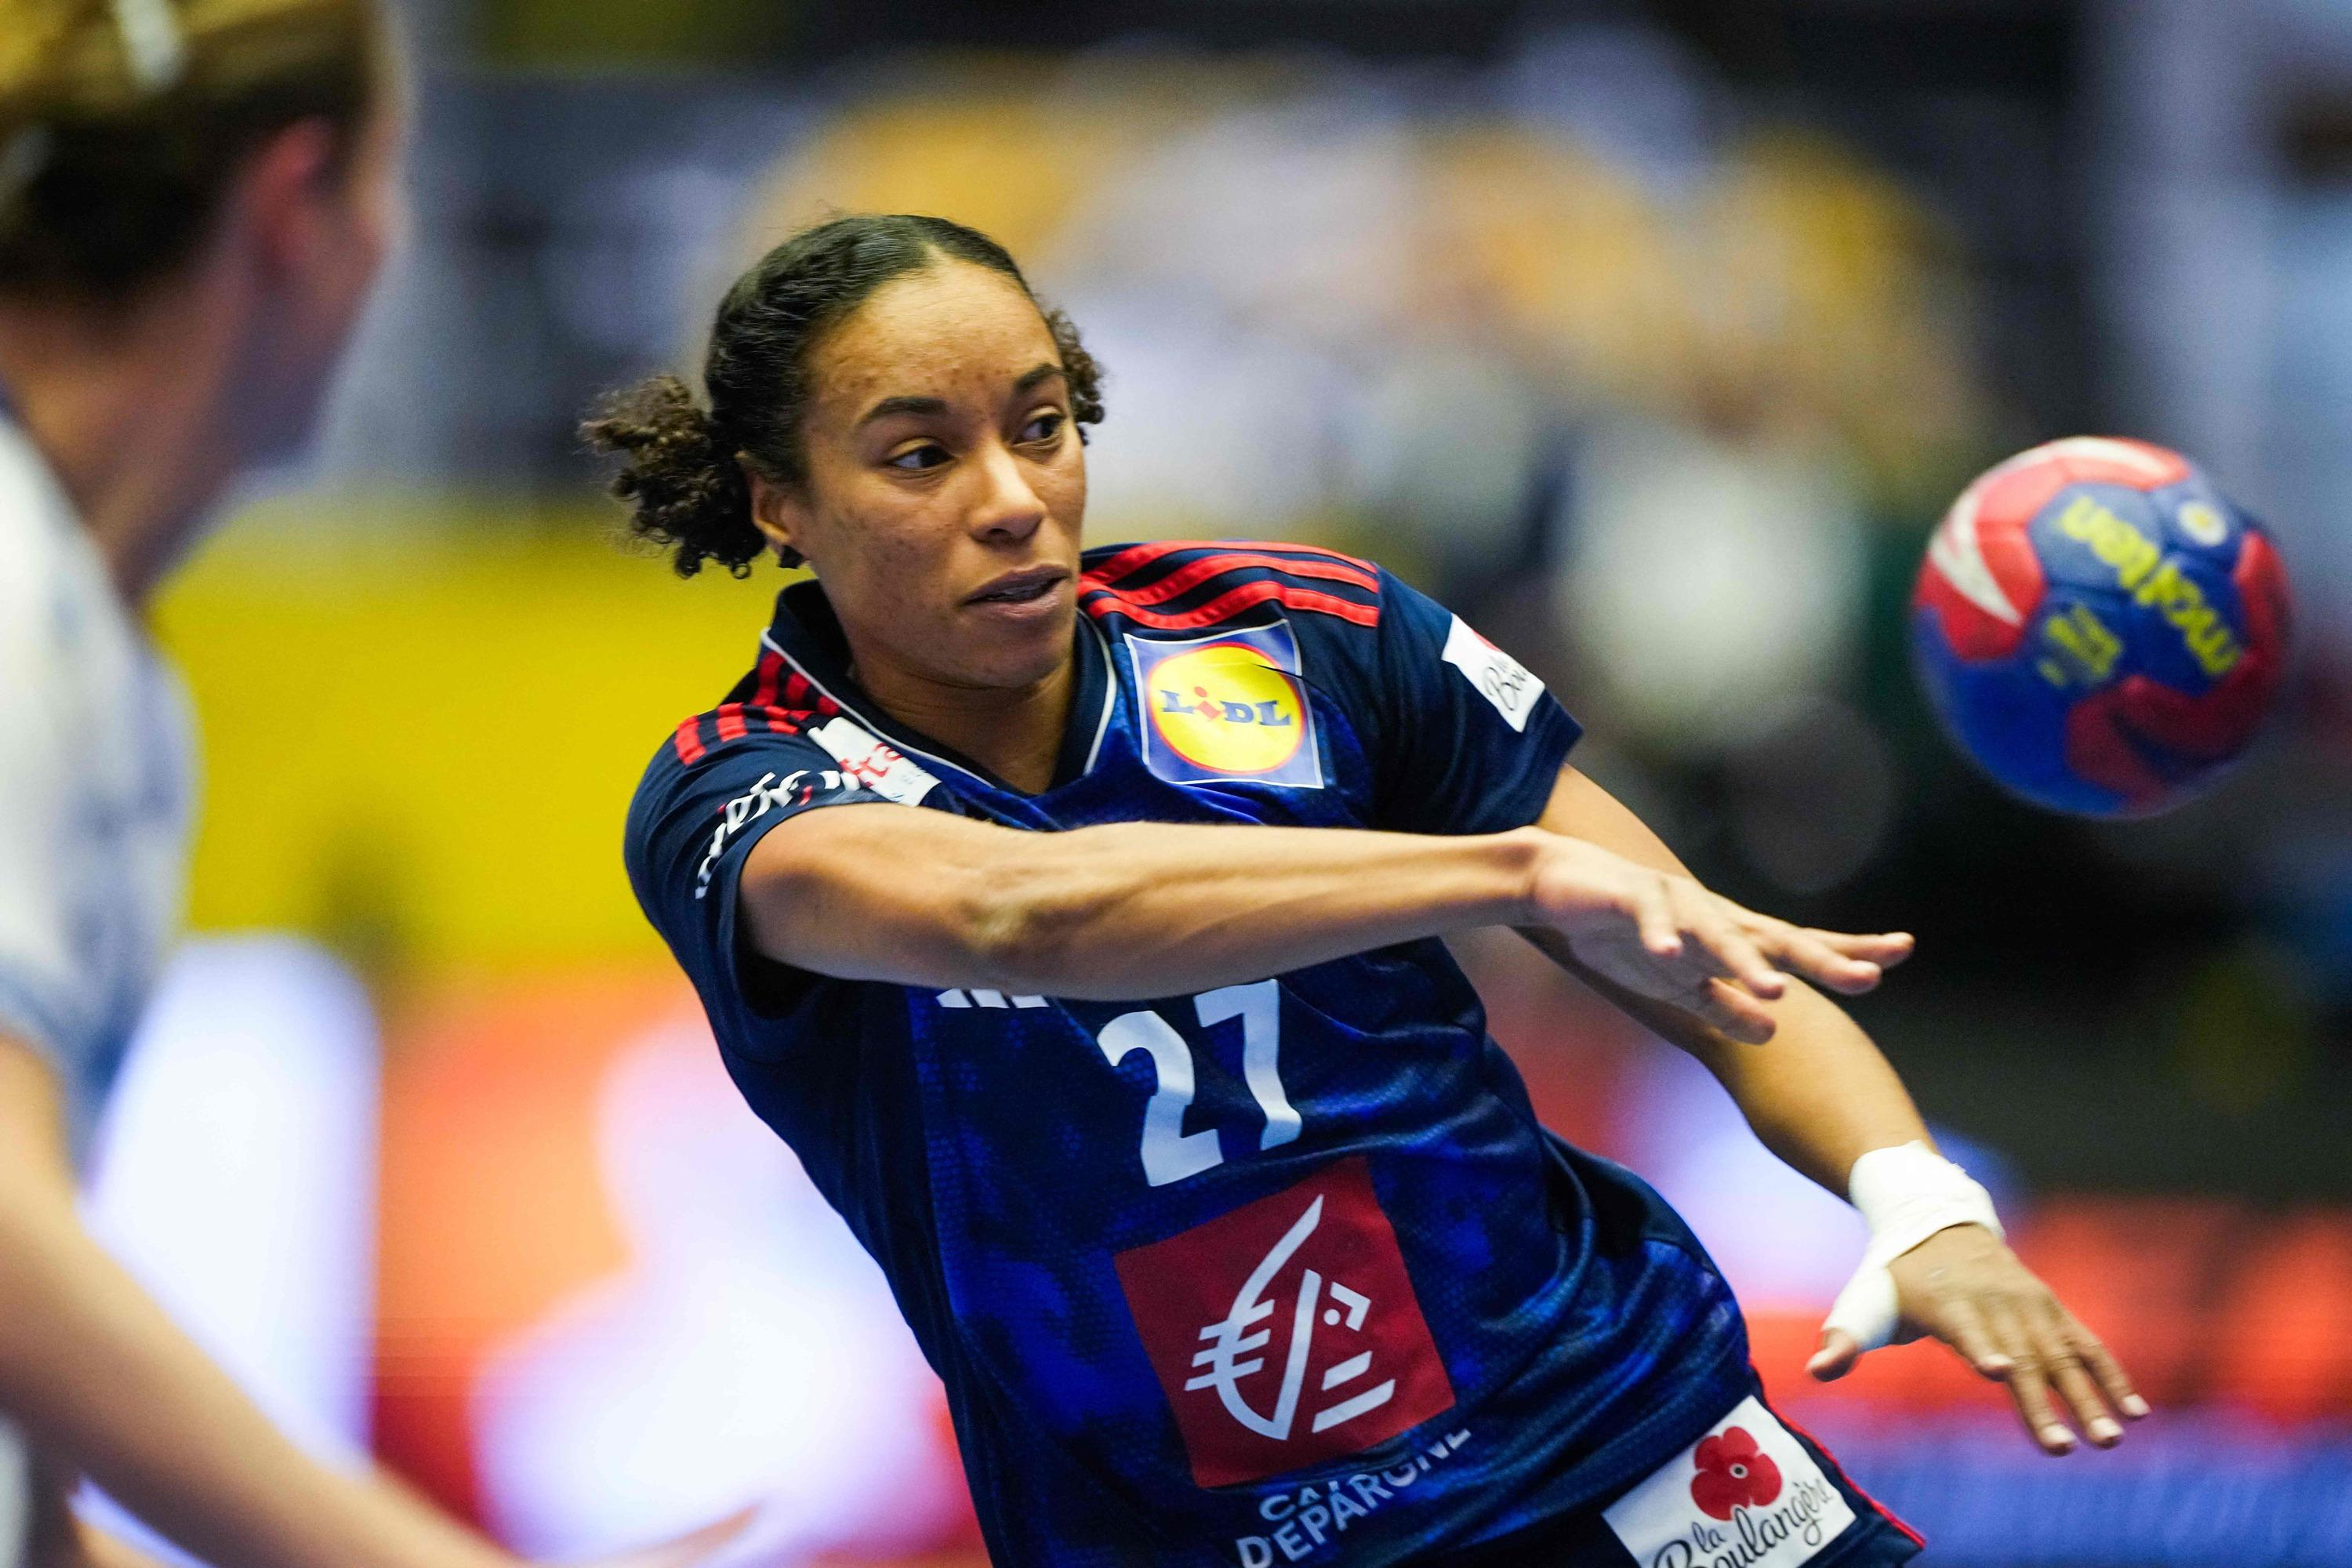 Handball World Cup: video summary of Les Bleues' victory against Slovenia